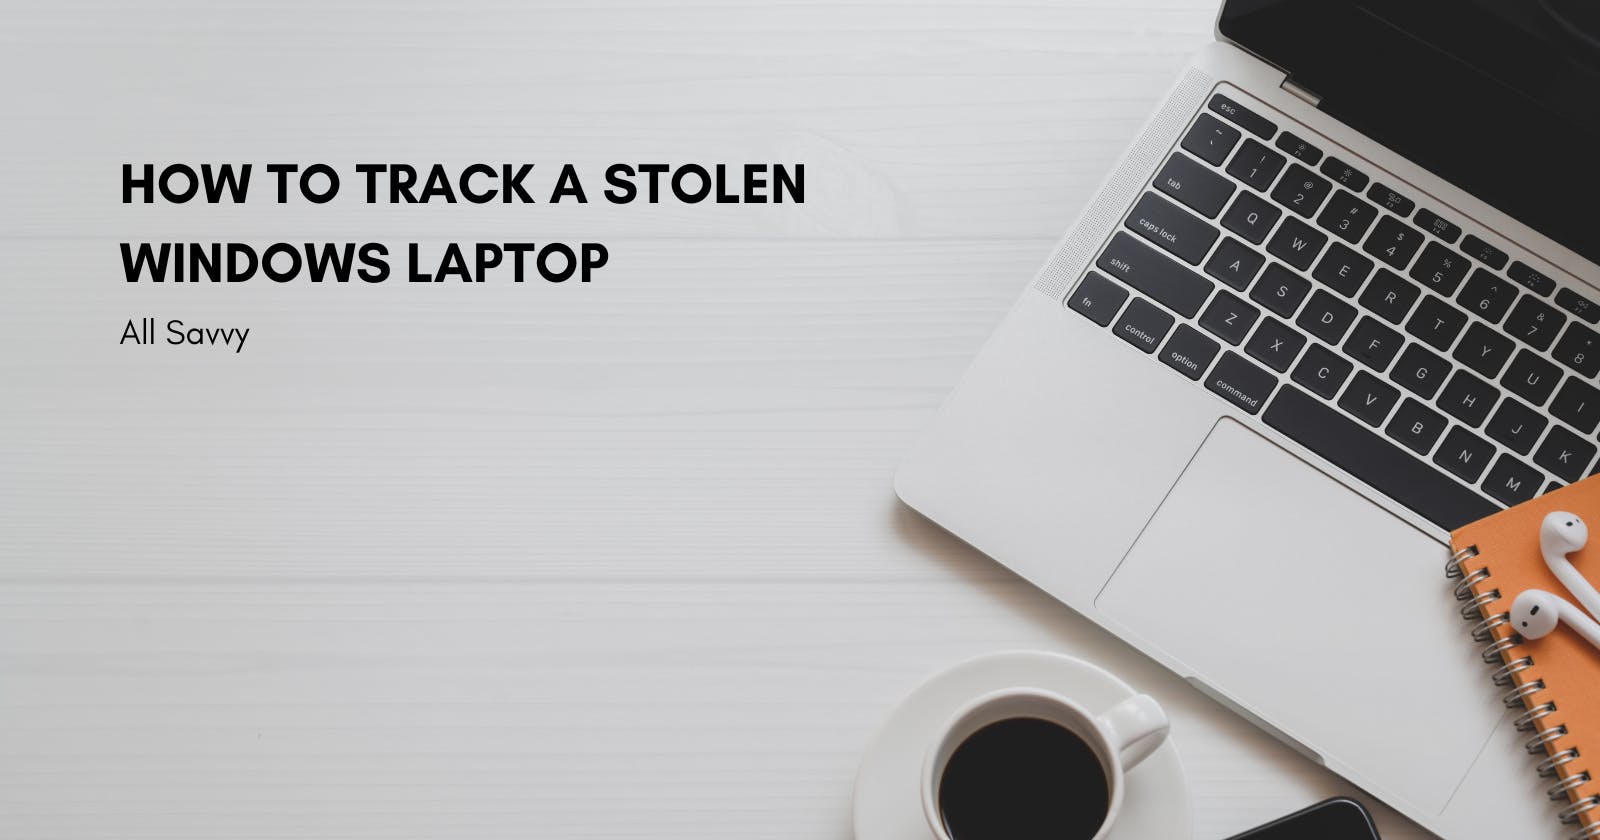 How to Track a Stolen Windows Laptop